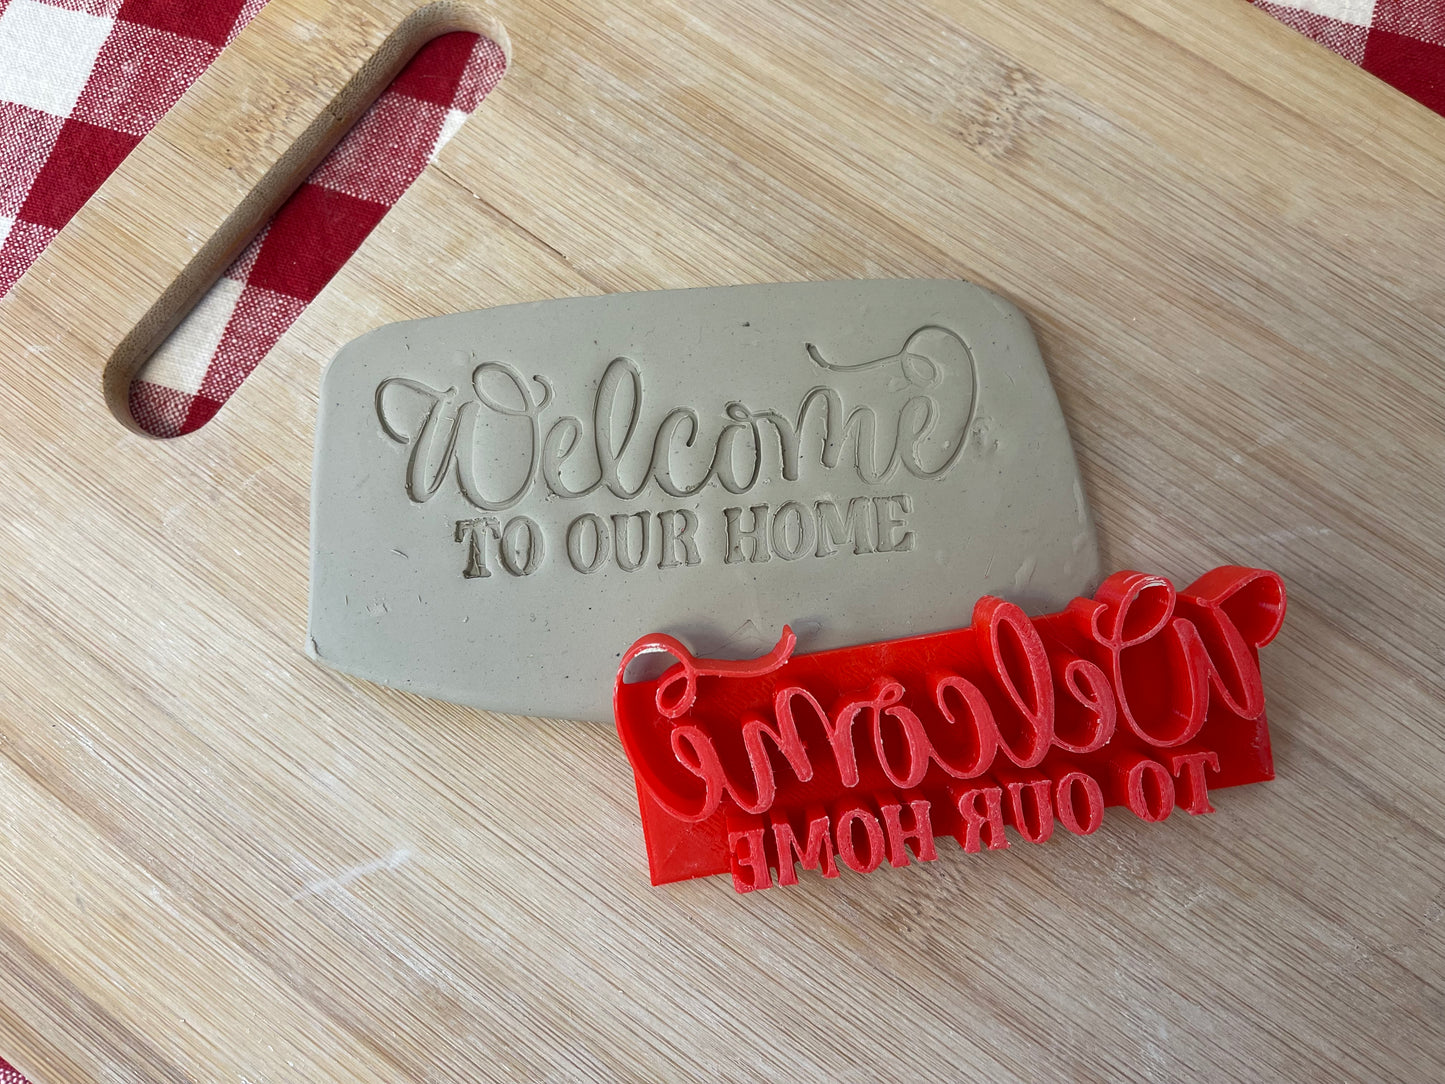 "Welcome" or "Welcome To Our Home" word stamp - Pottery Tool, plastic 3d printed, multiple sizes available